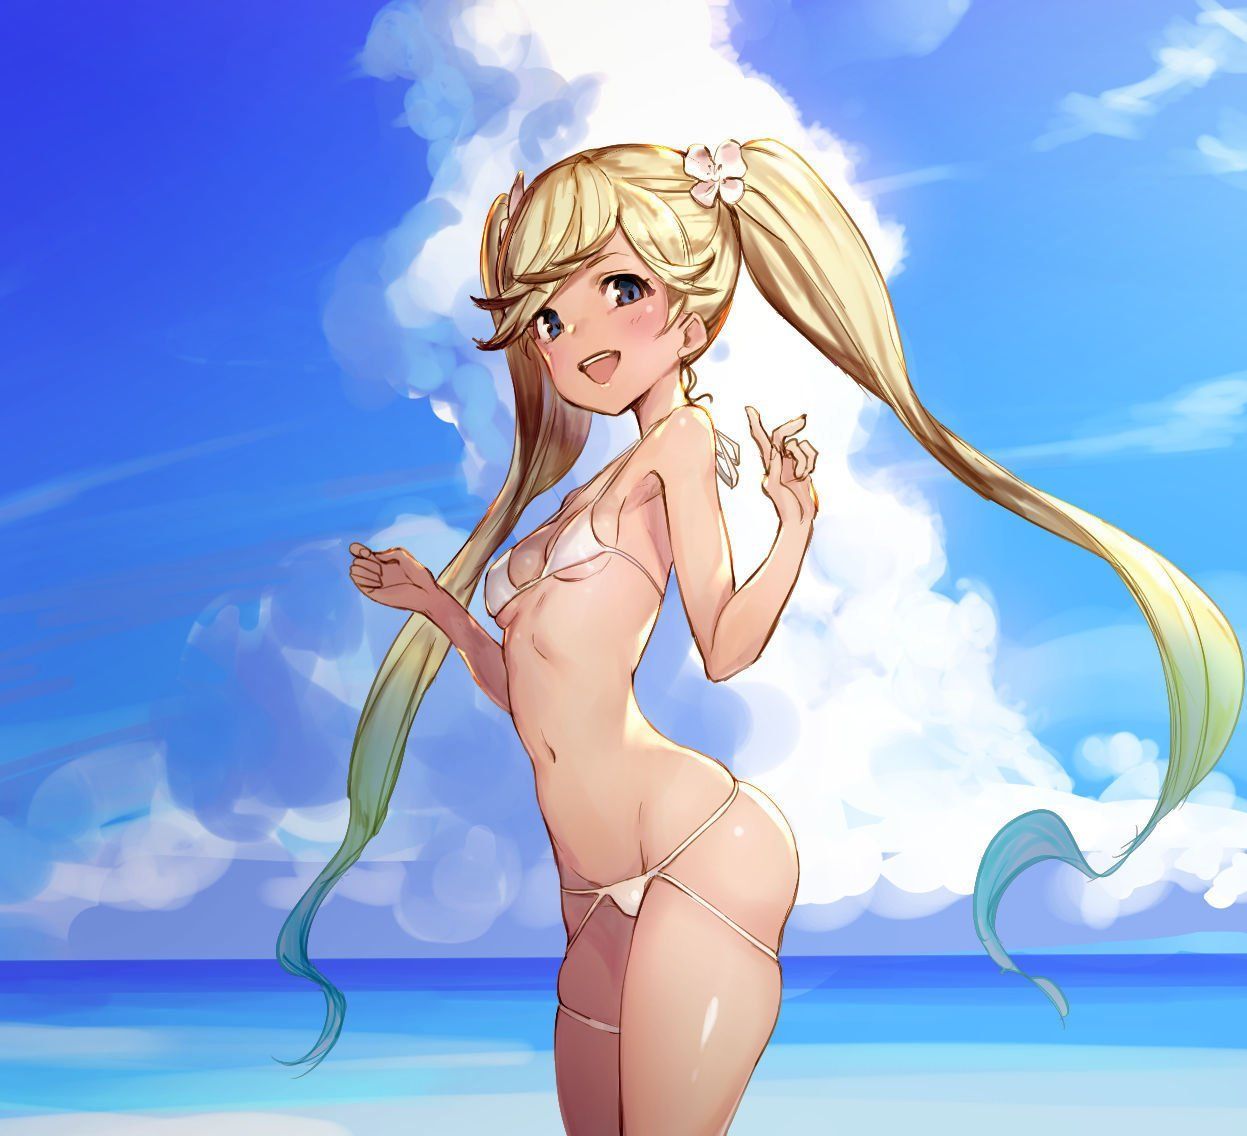 [Secondary] secondary erotic image of the girl that comes out in the Grand Blue fantasy Part 3 [Grubble] 15